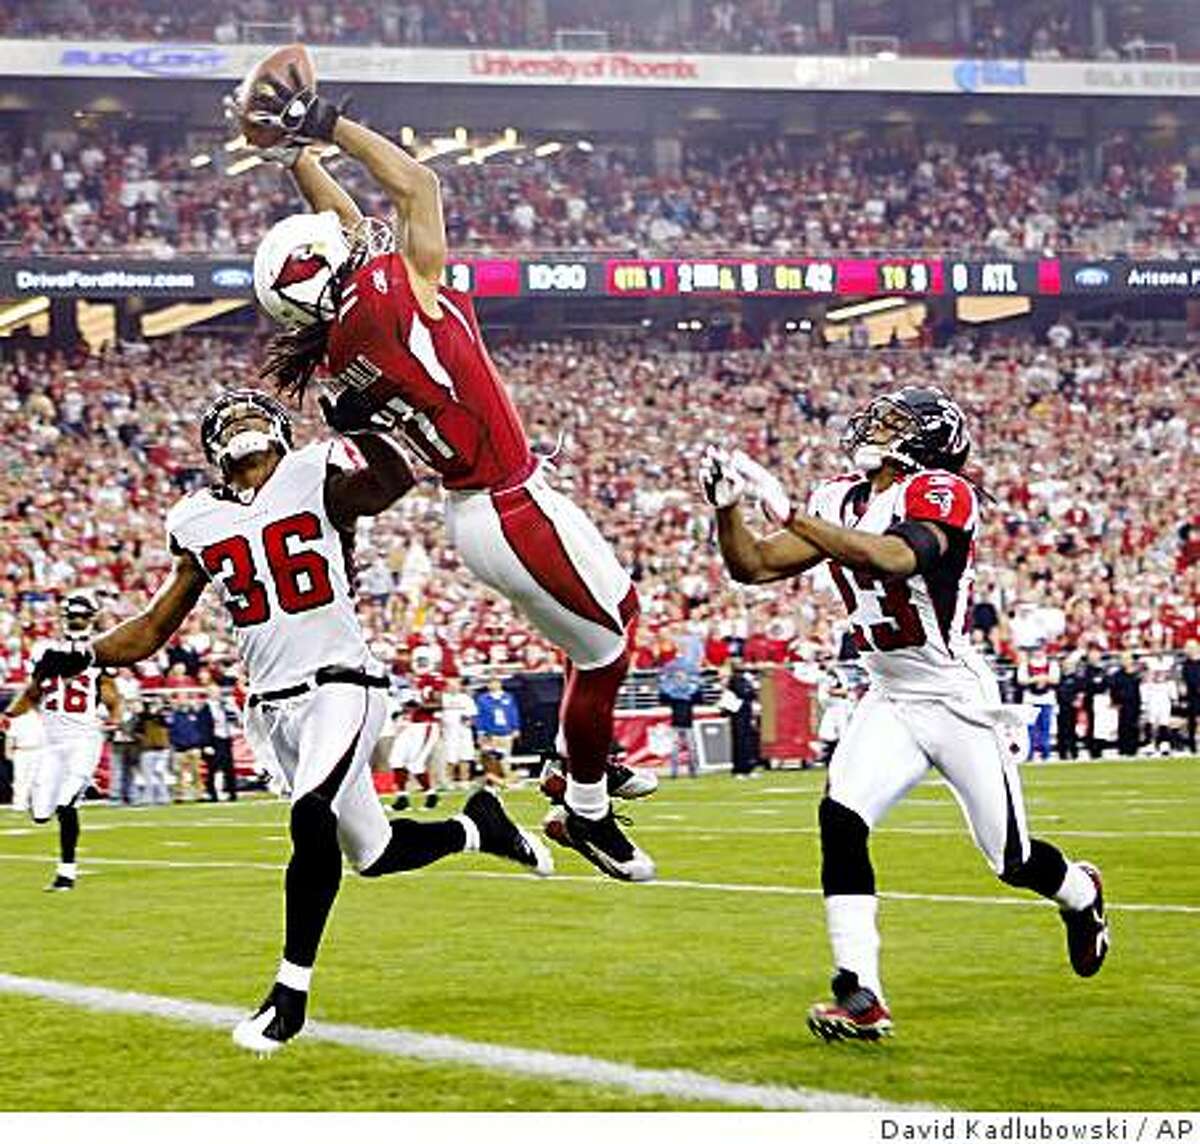 Arizona Cardinals wide receiver Larry Fitzgerald, center, catches the ball for a touchdown as Atlanta Falcons' Lawyer Milloy (36) and Chris Houston (23) defend during the first quarter of an NFC wild card playoff football game at the University of Phoenix Stadium in Glendale, Ariz, on Saturday, Jan. 3, 2009. (AP Photo/The Arizona Republic, David Kadlubowski ) ** MARICOPA COUNTY OUT, MESA TRIBUNE OUT, MAGS OUT, NO SALES **